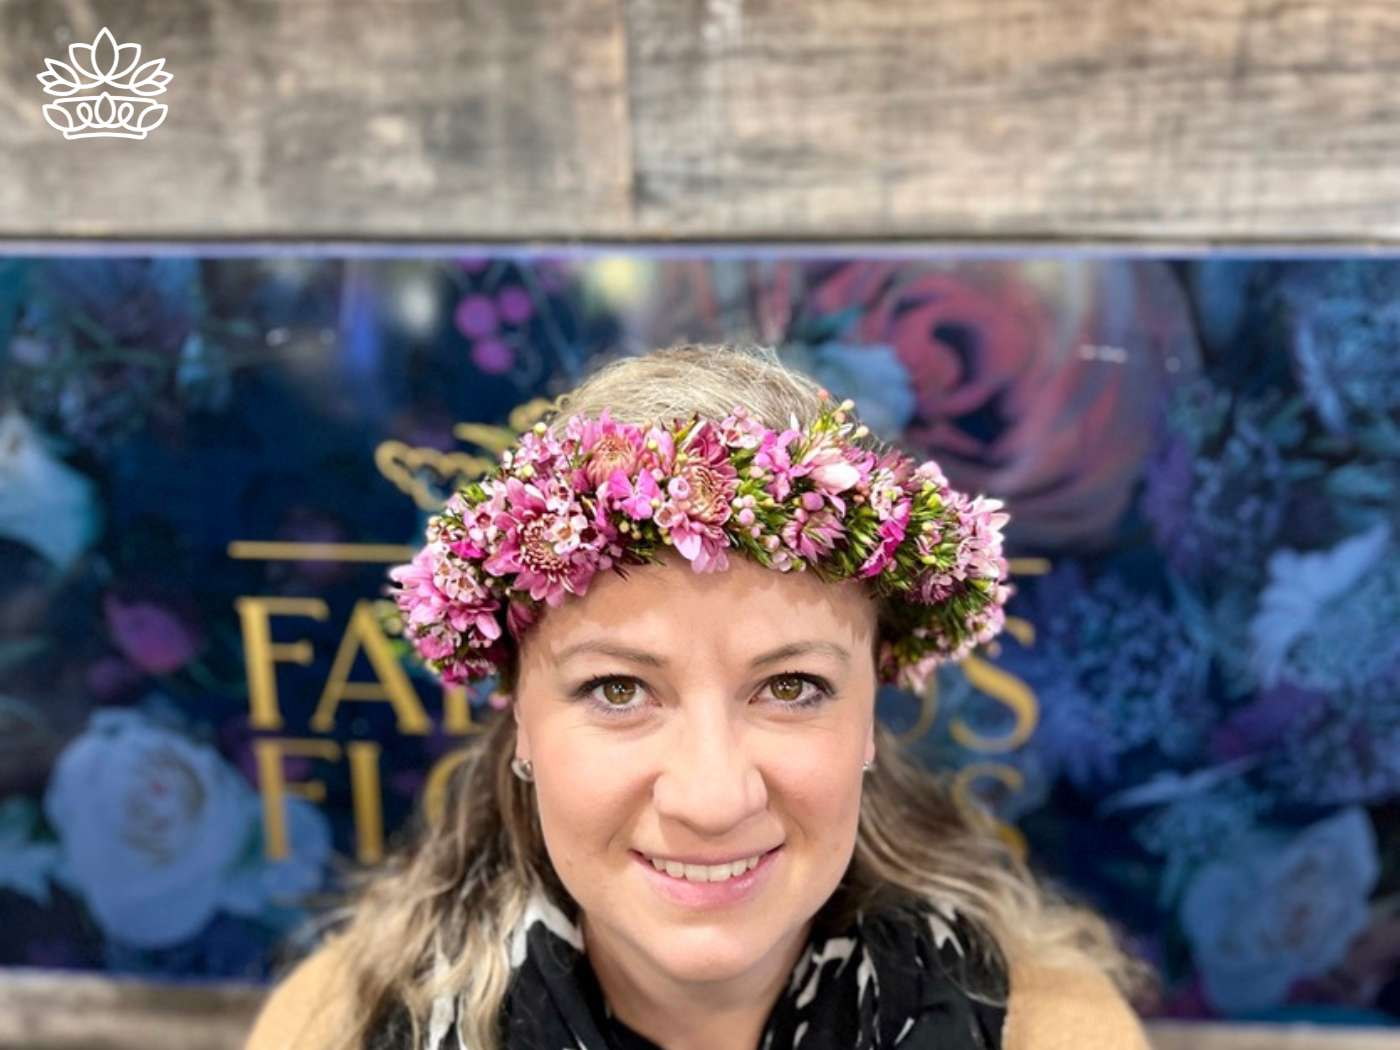 A smiling woman adorned with a vibrant pink floral crown against a backdrop with 'Fabulous Flowers' text, representing the festive and handcrafted selection from Fabulous Flowers and Gifts.